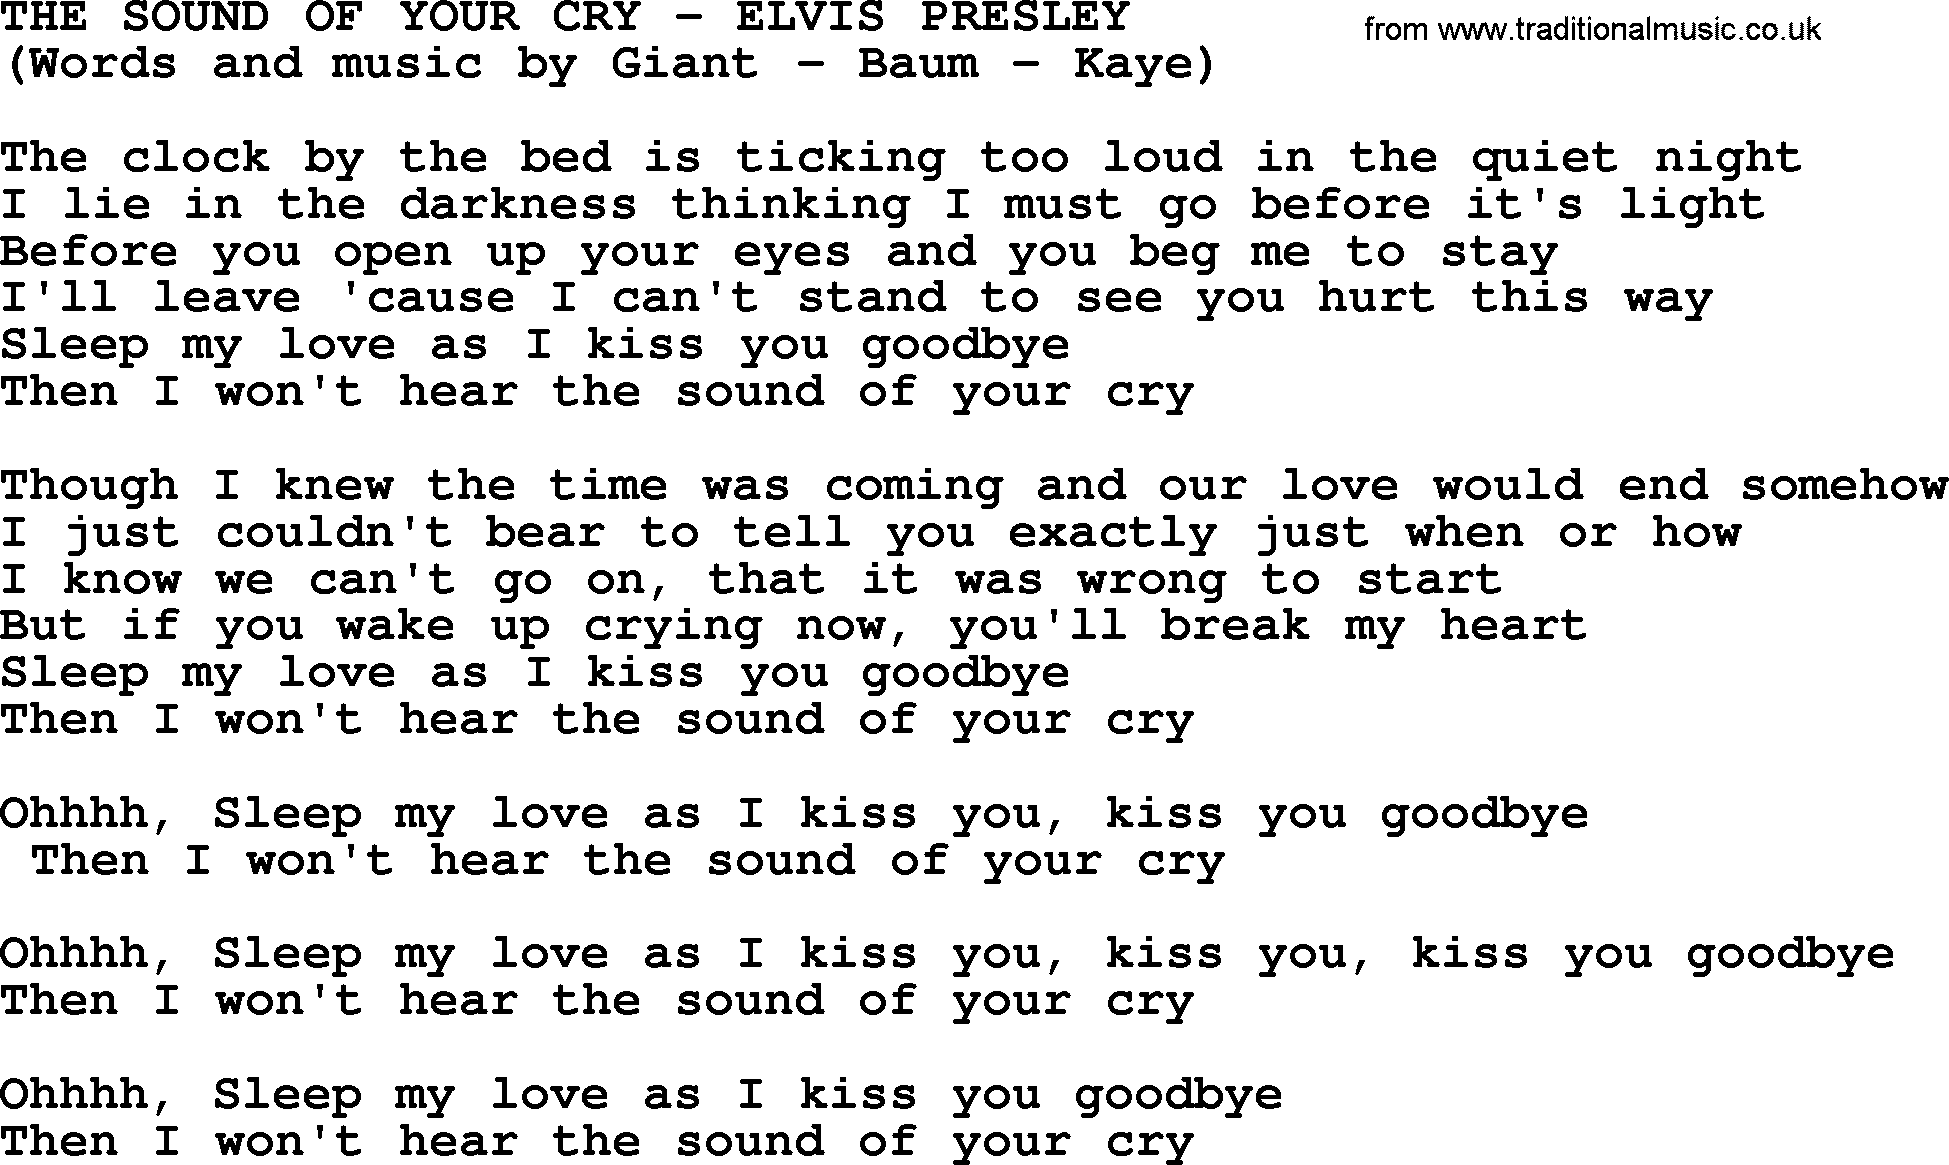 Elvis Presley song: The Sound Of Your Cry lyrics